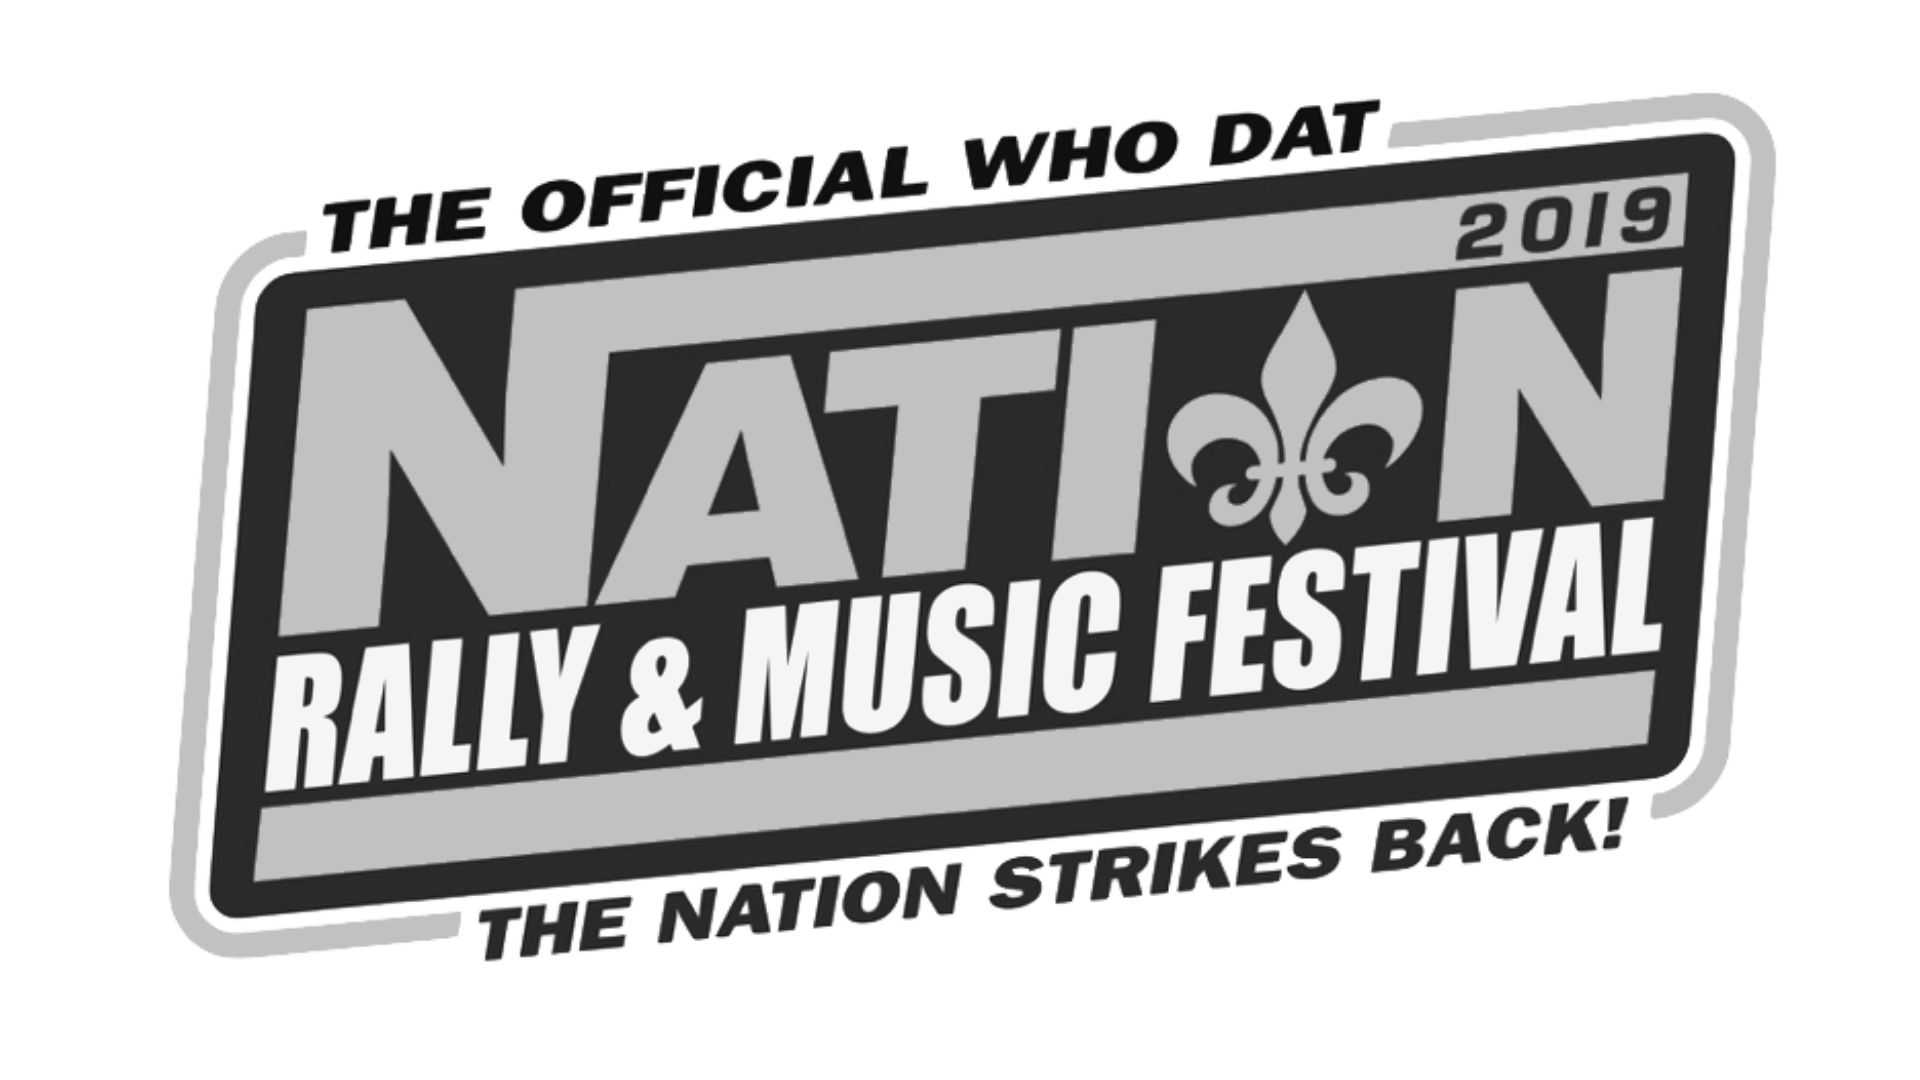 The Official WHO DAT Nation Rally & Music Festival